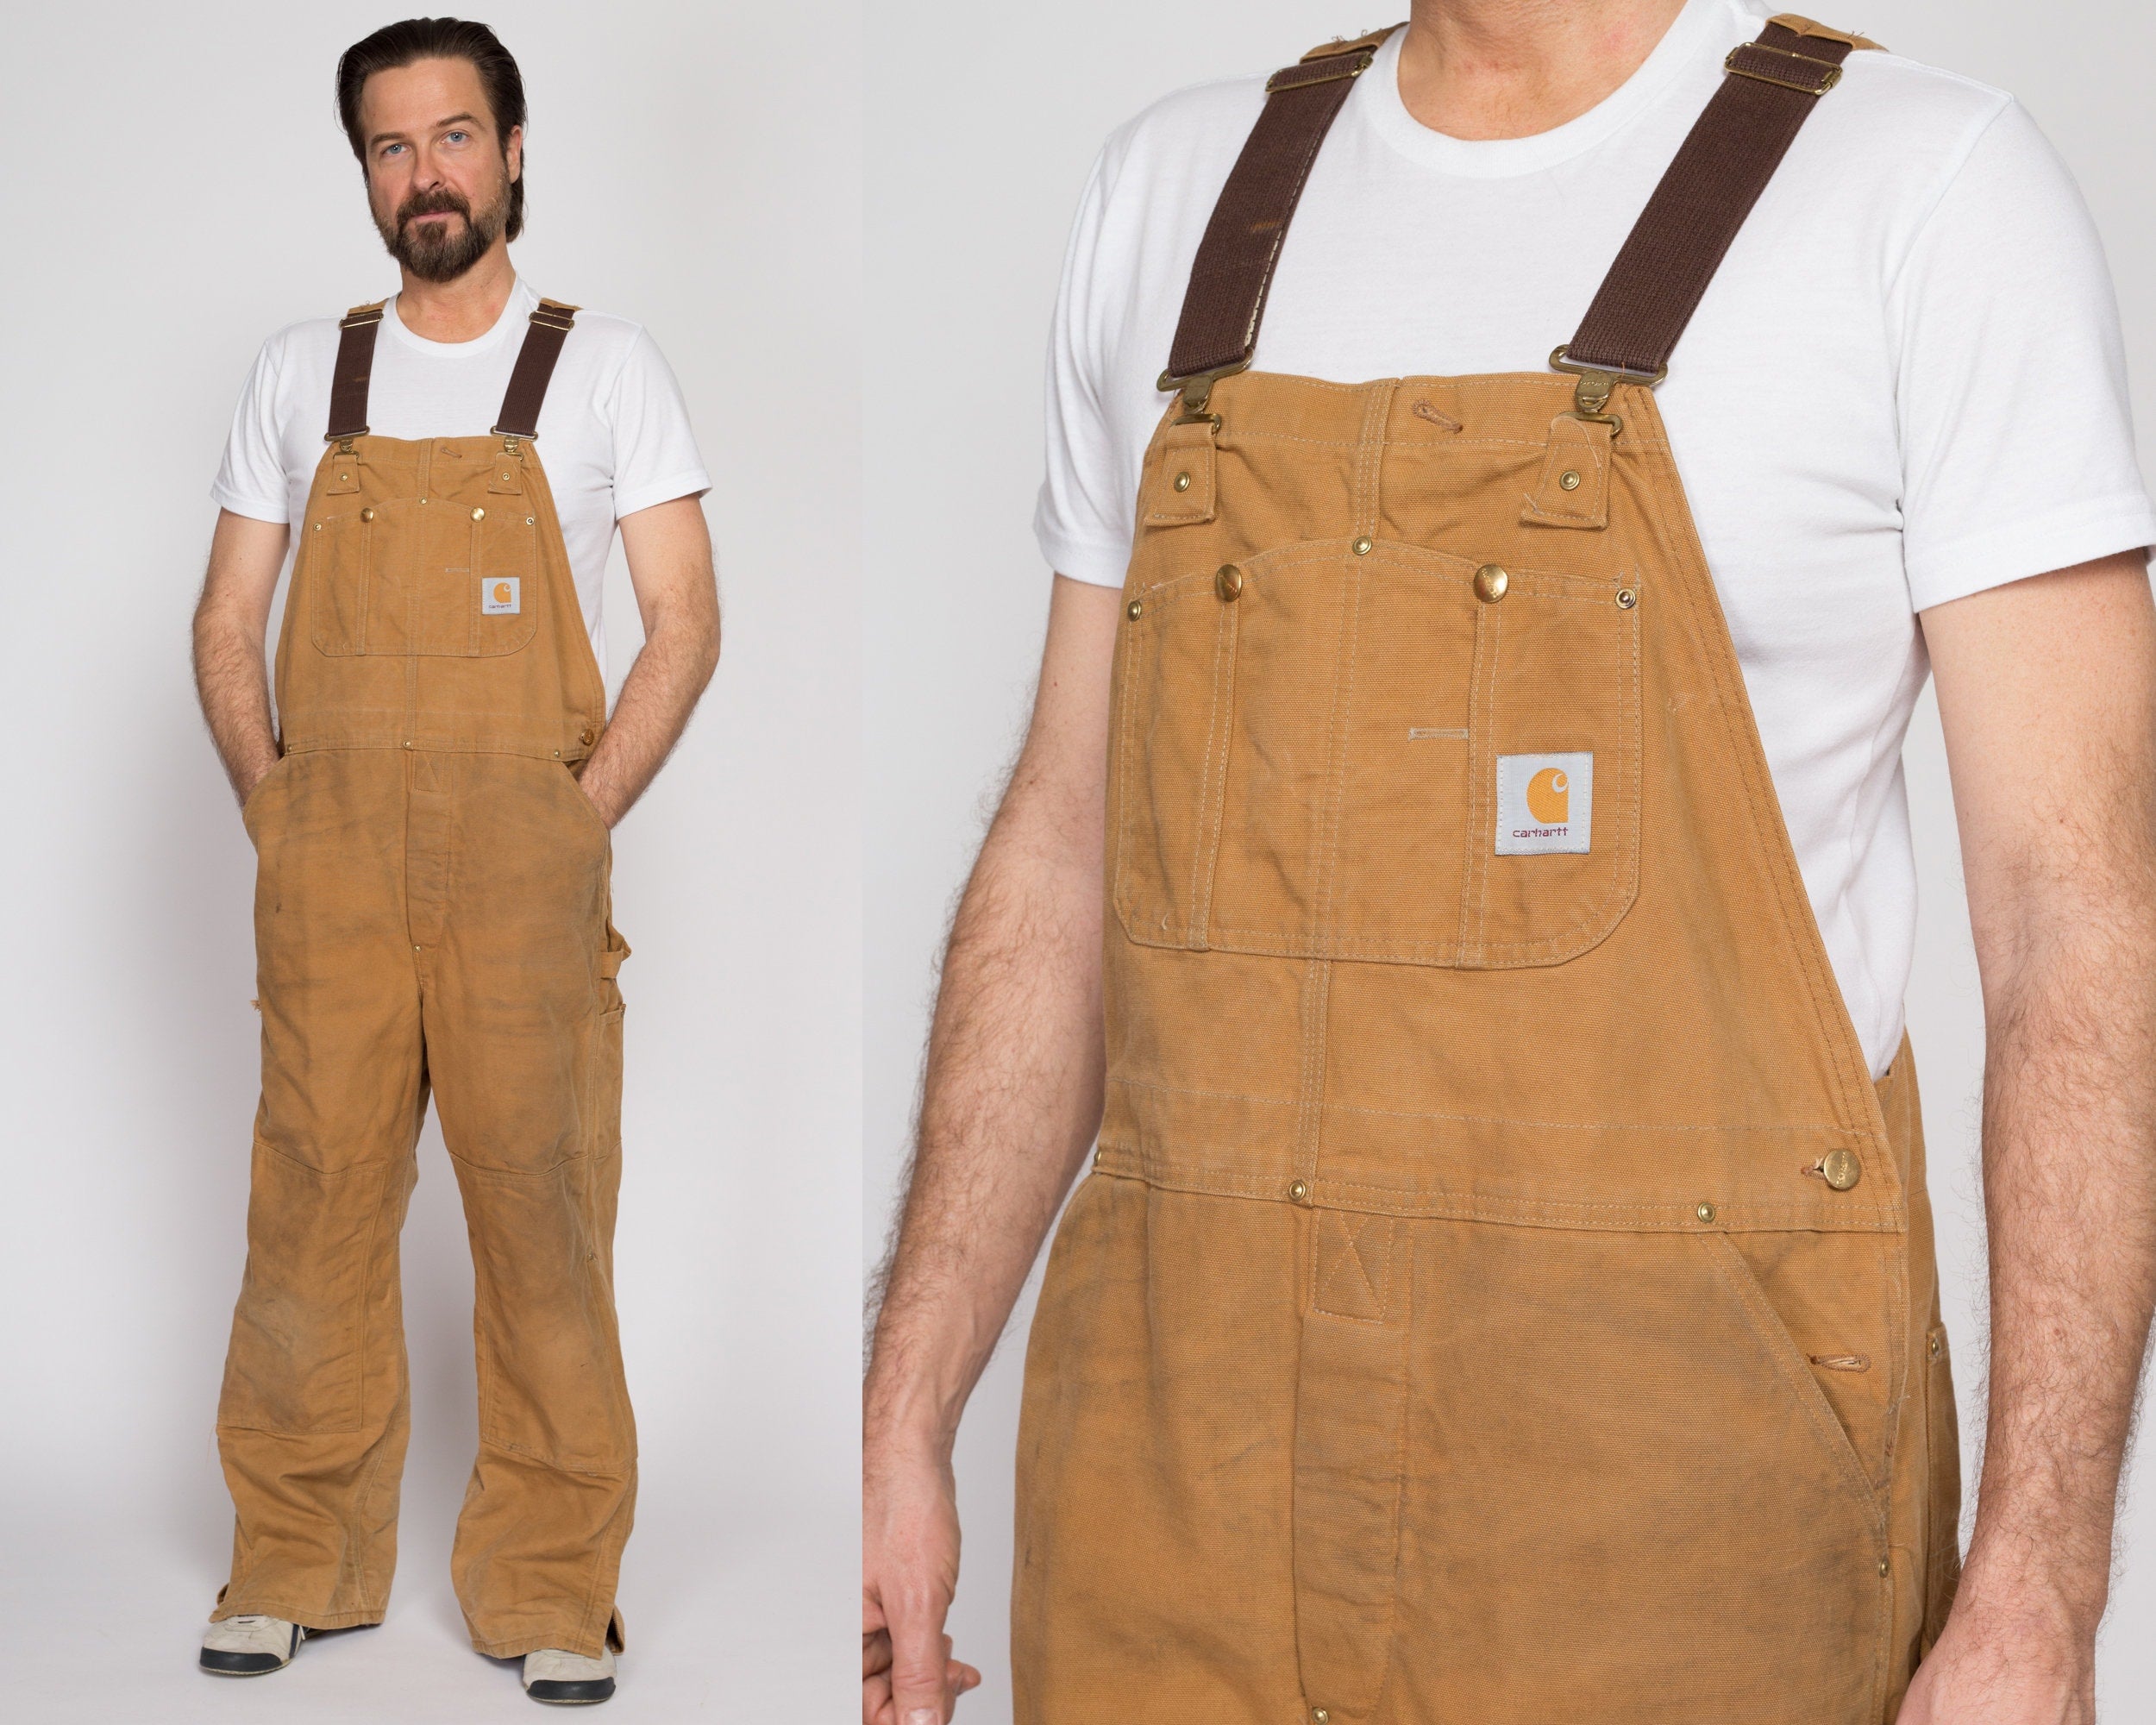 XL Vintage Carhartt Tan Insulated Overalls